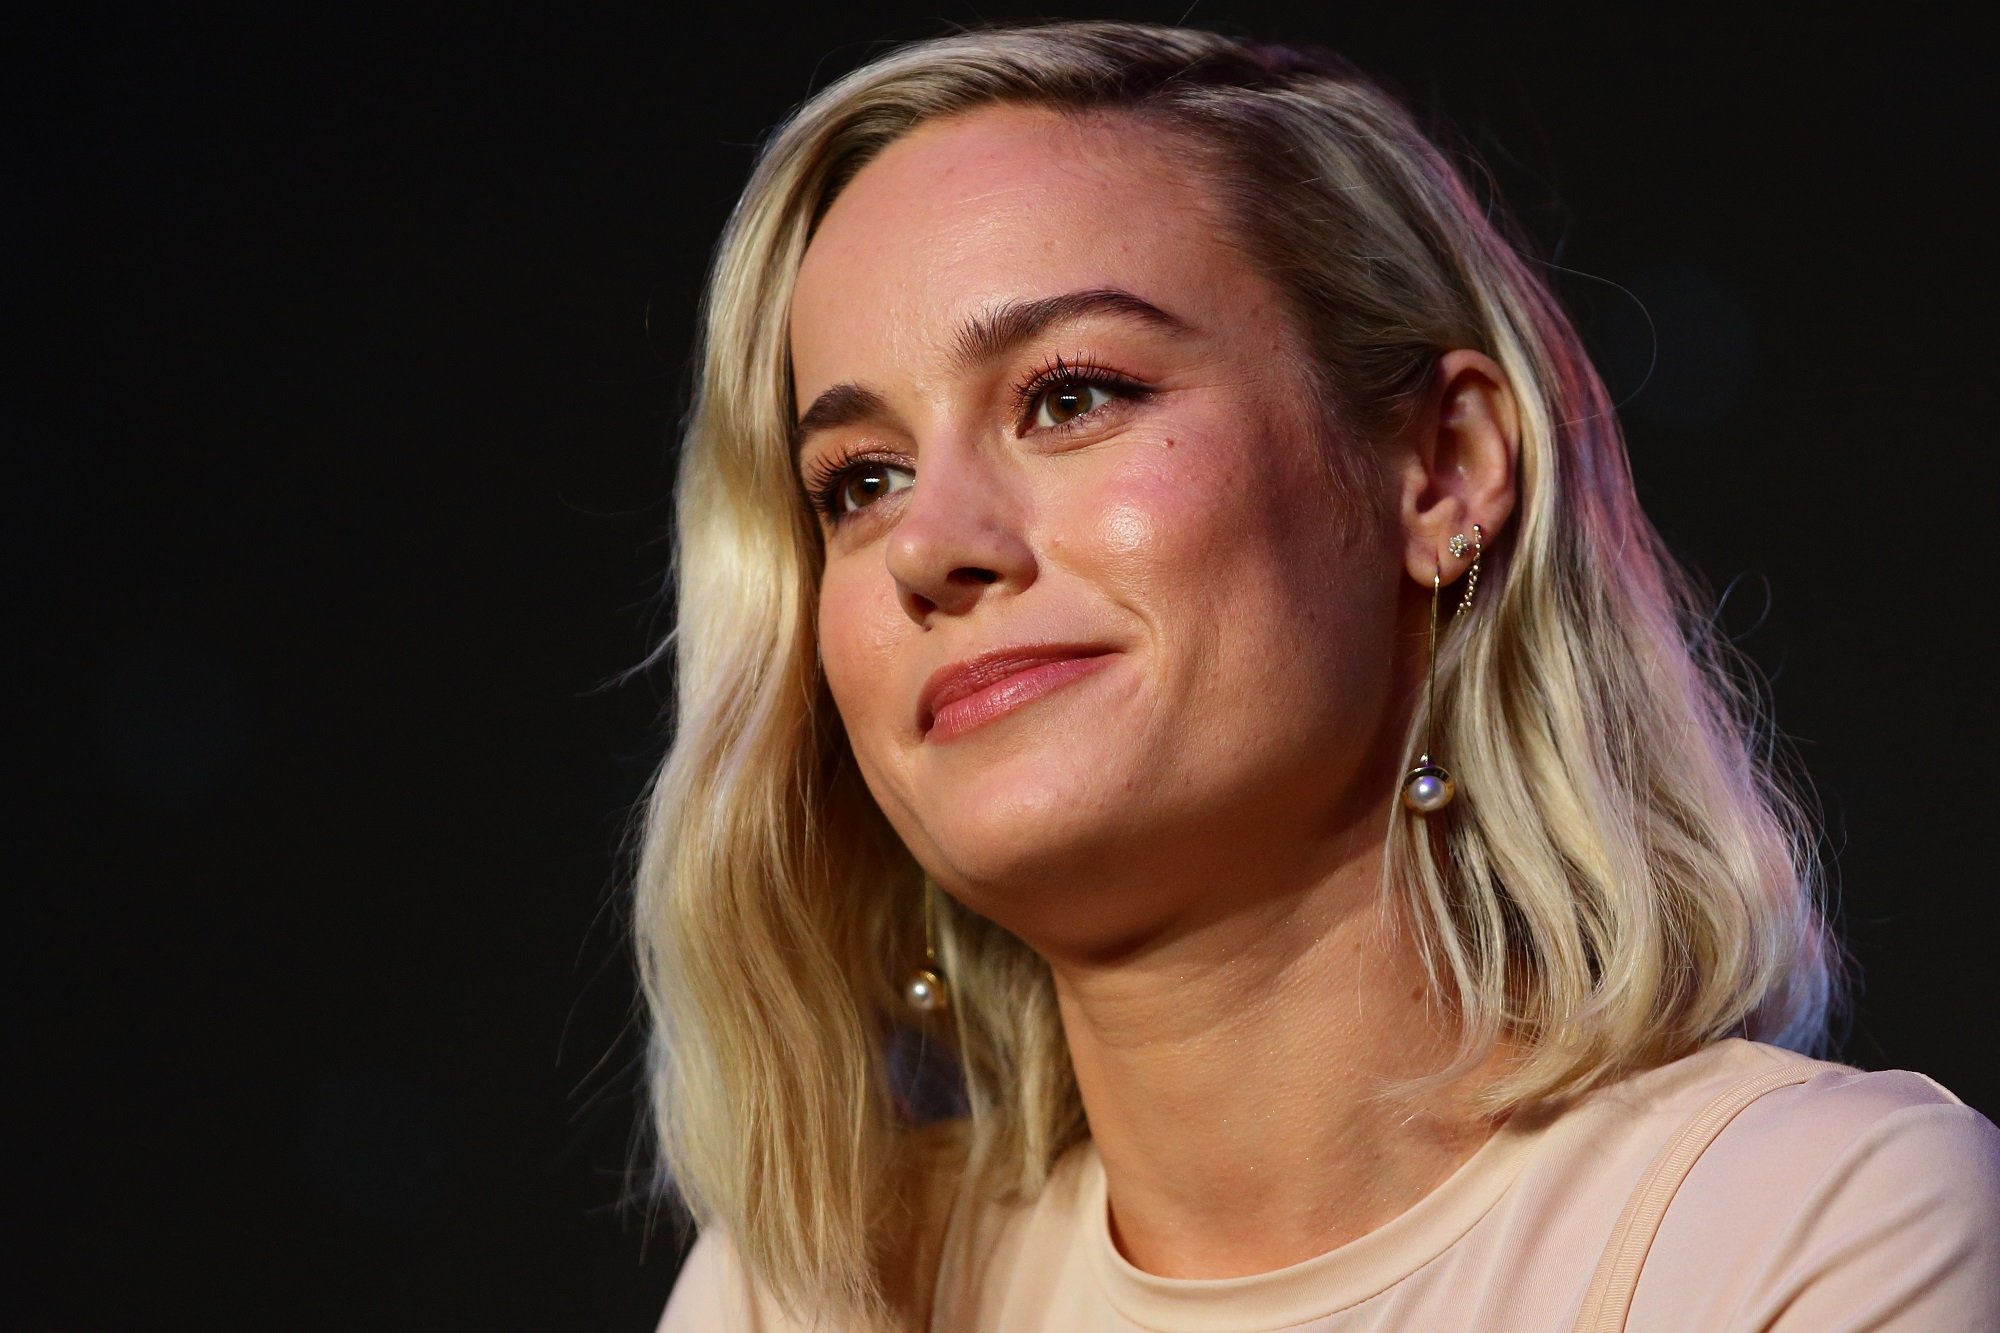 Brie Larson attends the press conference for 'Captain Marvel' on February 14, 2019 in Singapore. 